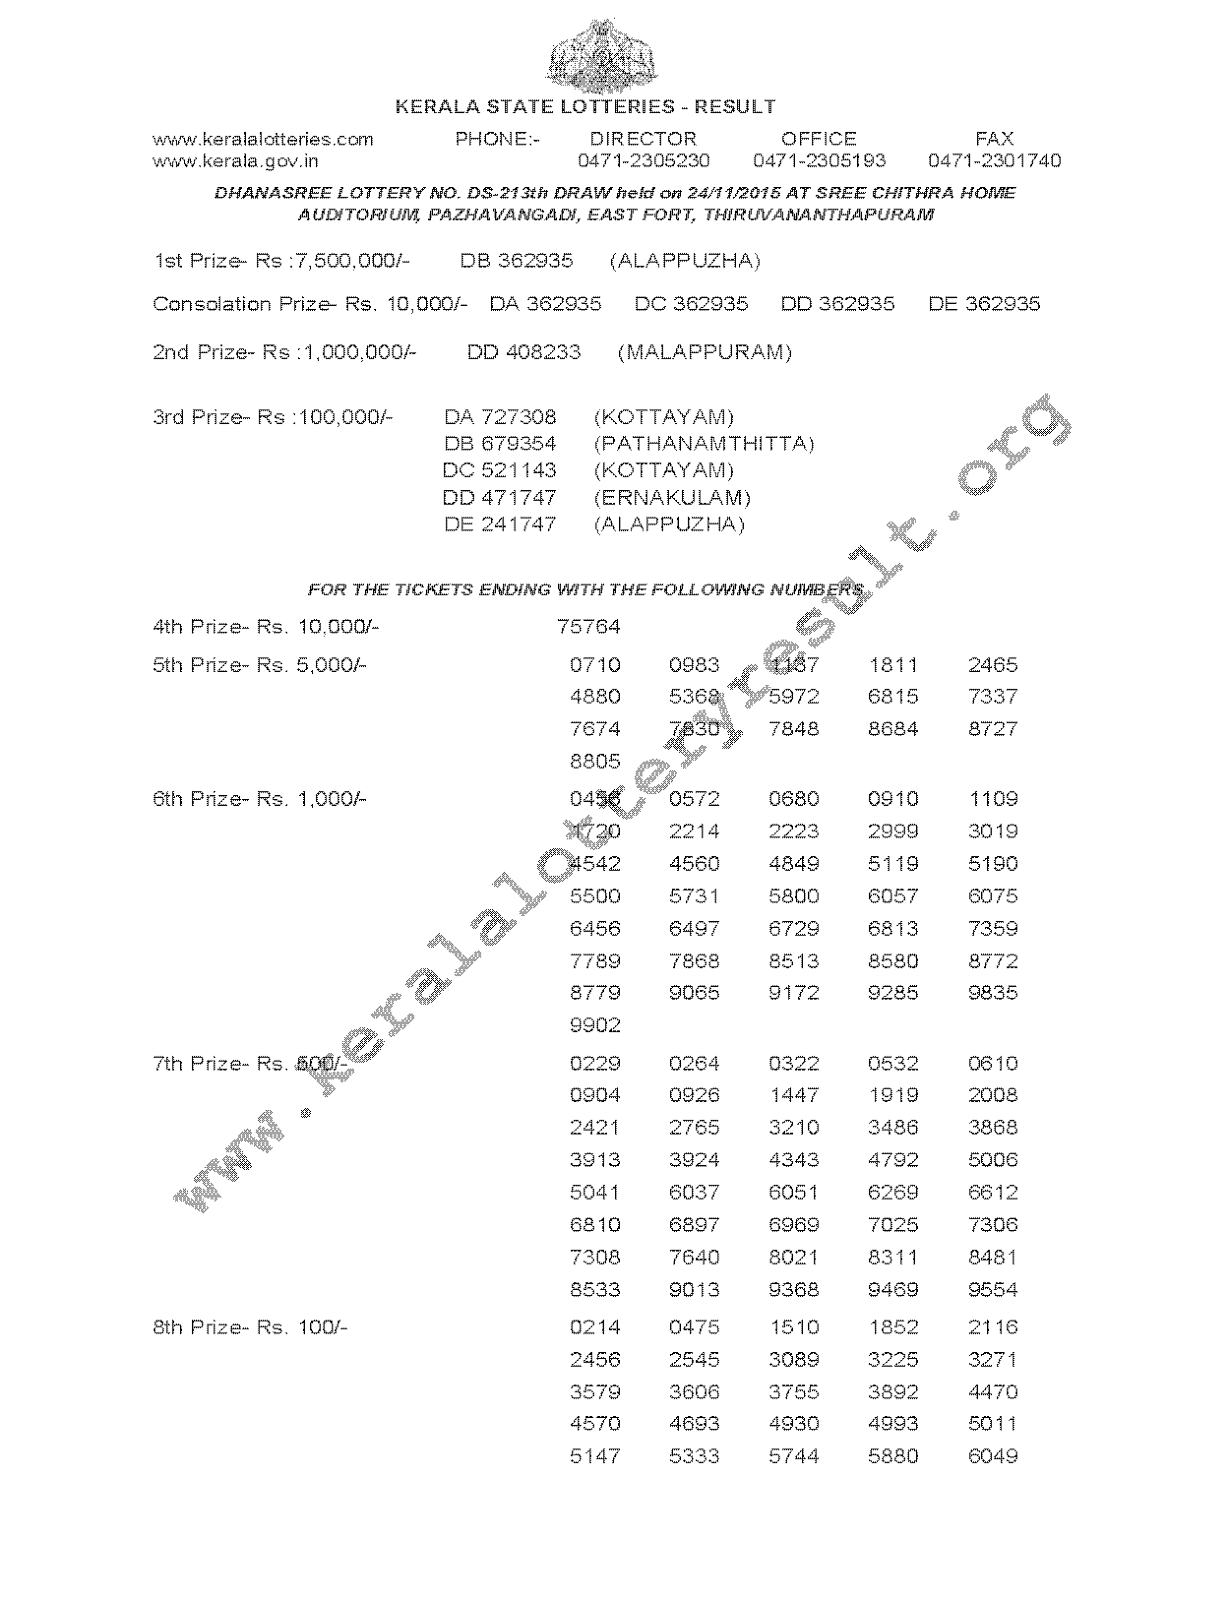 DHANASREE Lottery DS 213 Result 24-11-2015